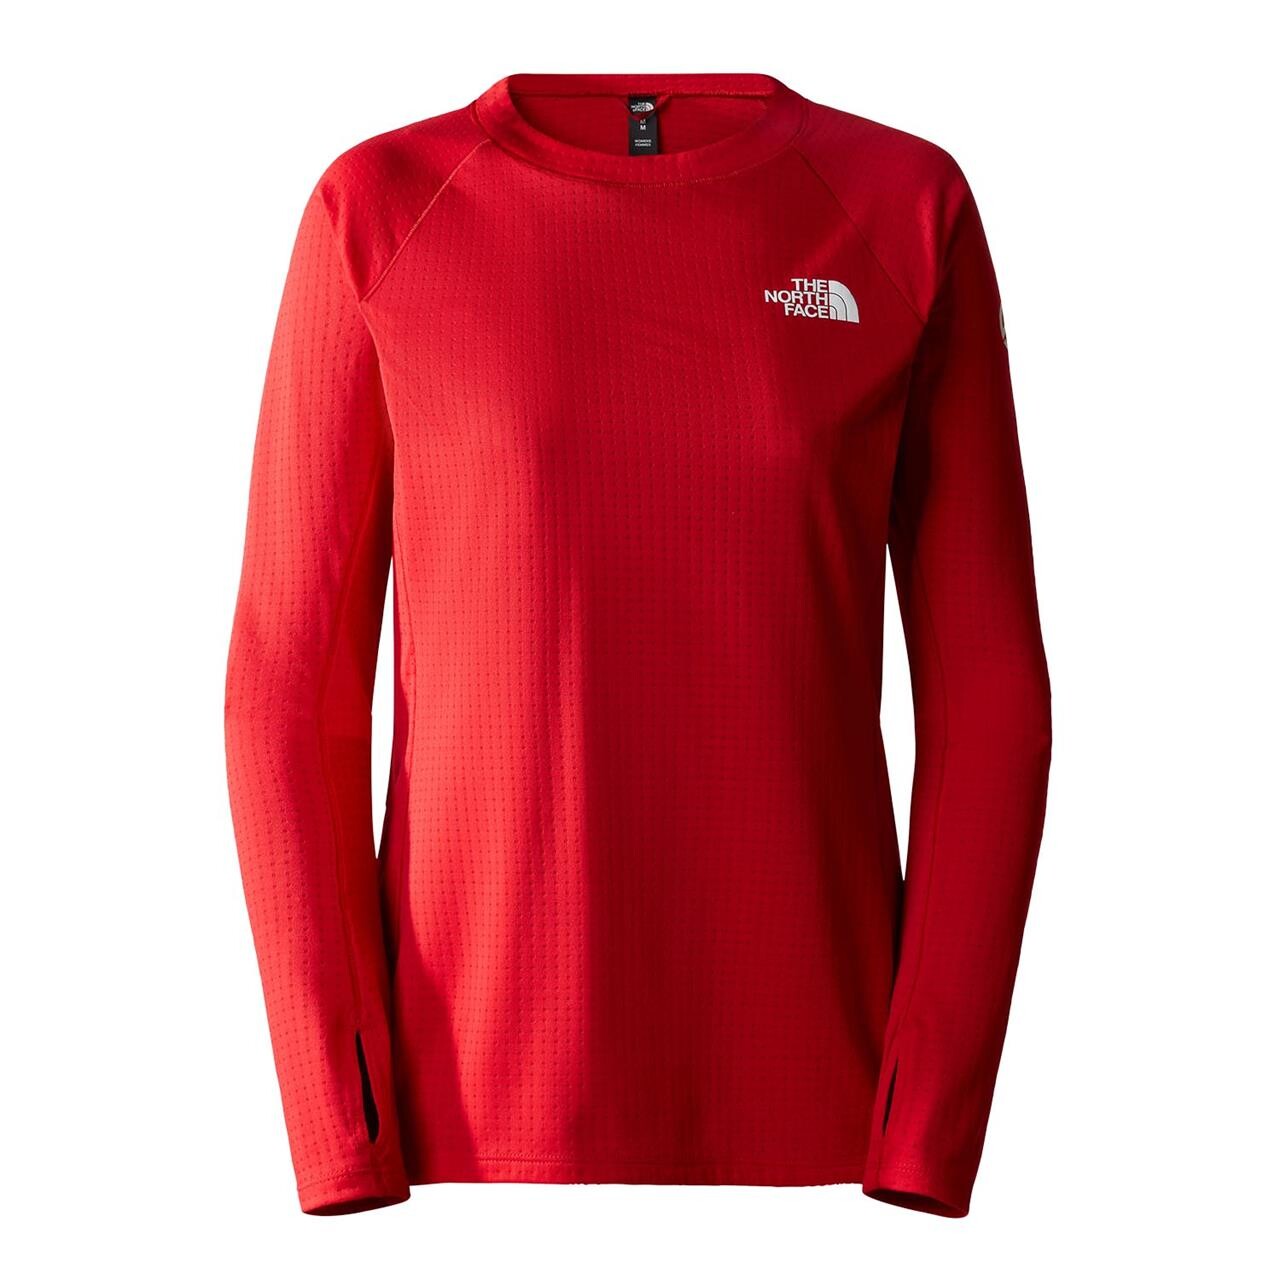 Se The North Face Womens Summit Pro 120 Crew (Rød (TNF RED) Large) hos Friluftsland.dk